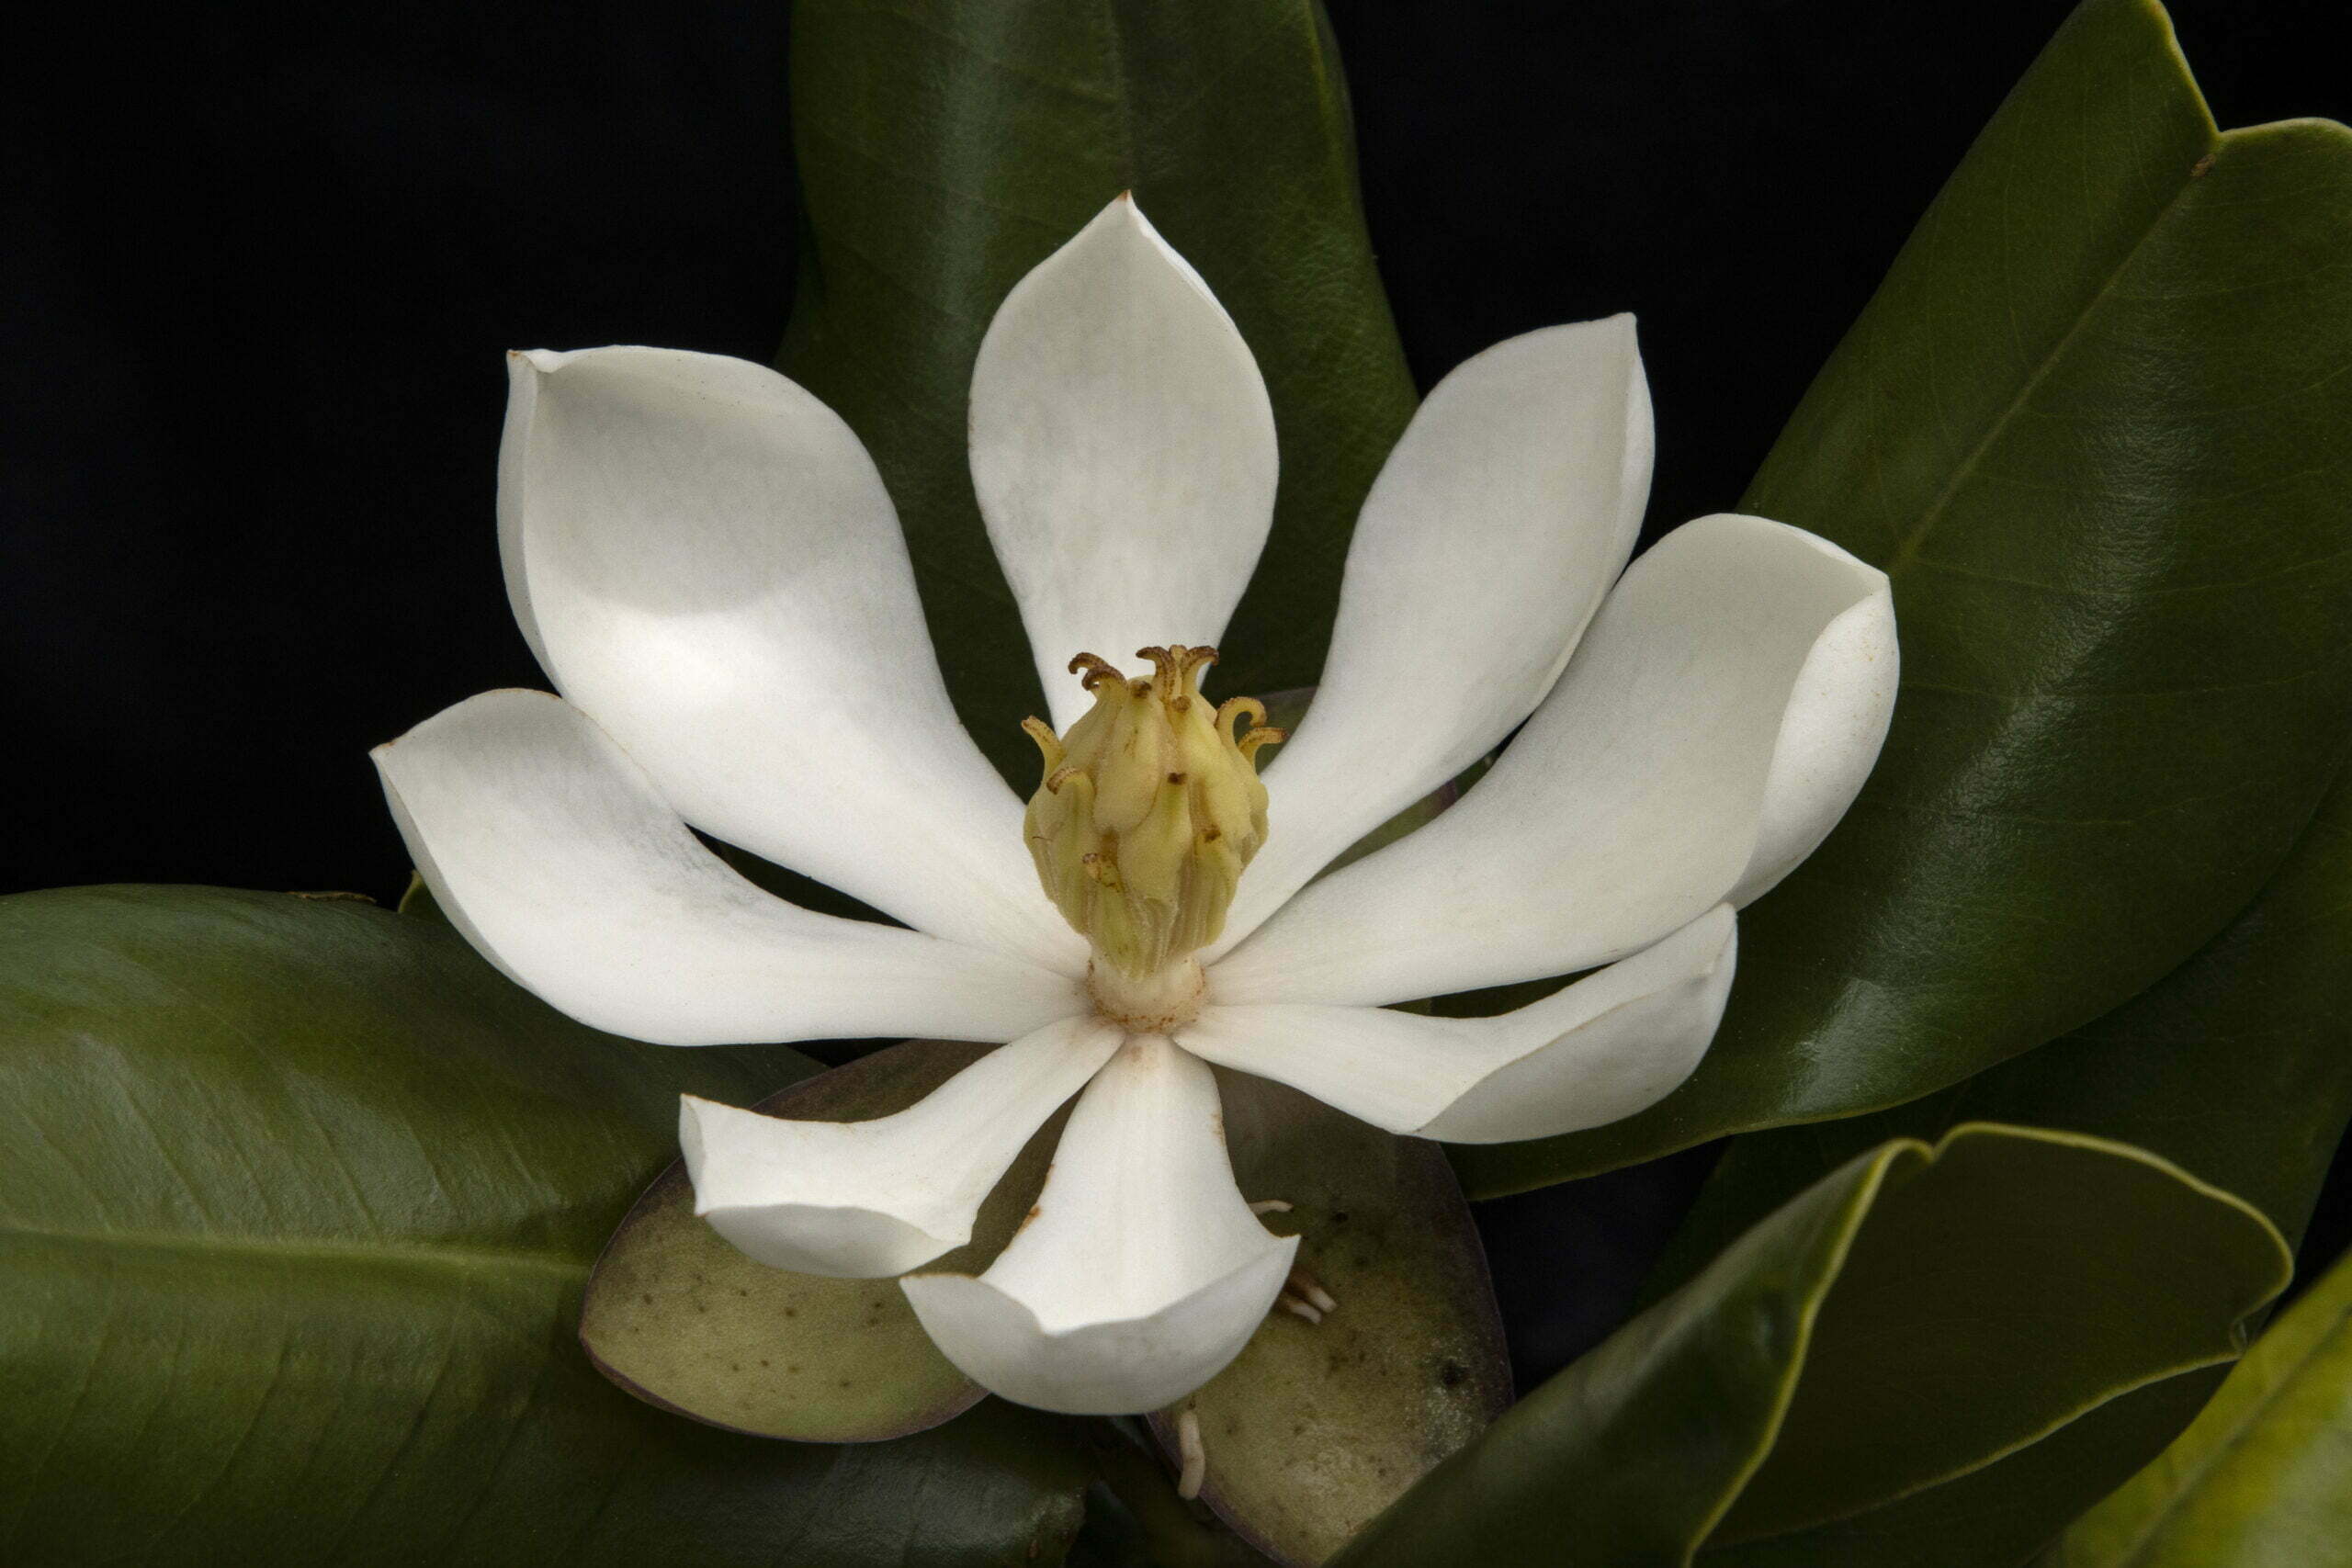 Rediscovered magnolia tree spurs hope in Haiti, where just 1 percent of the country’s original forests remain